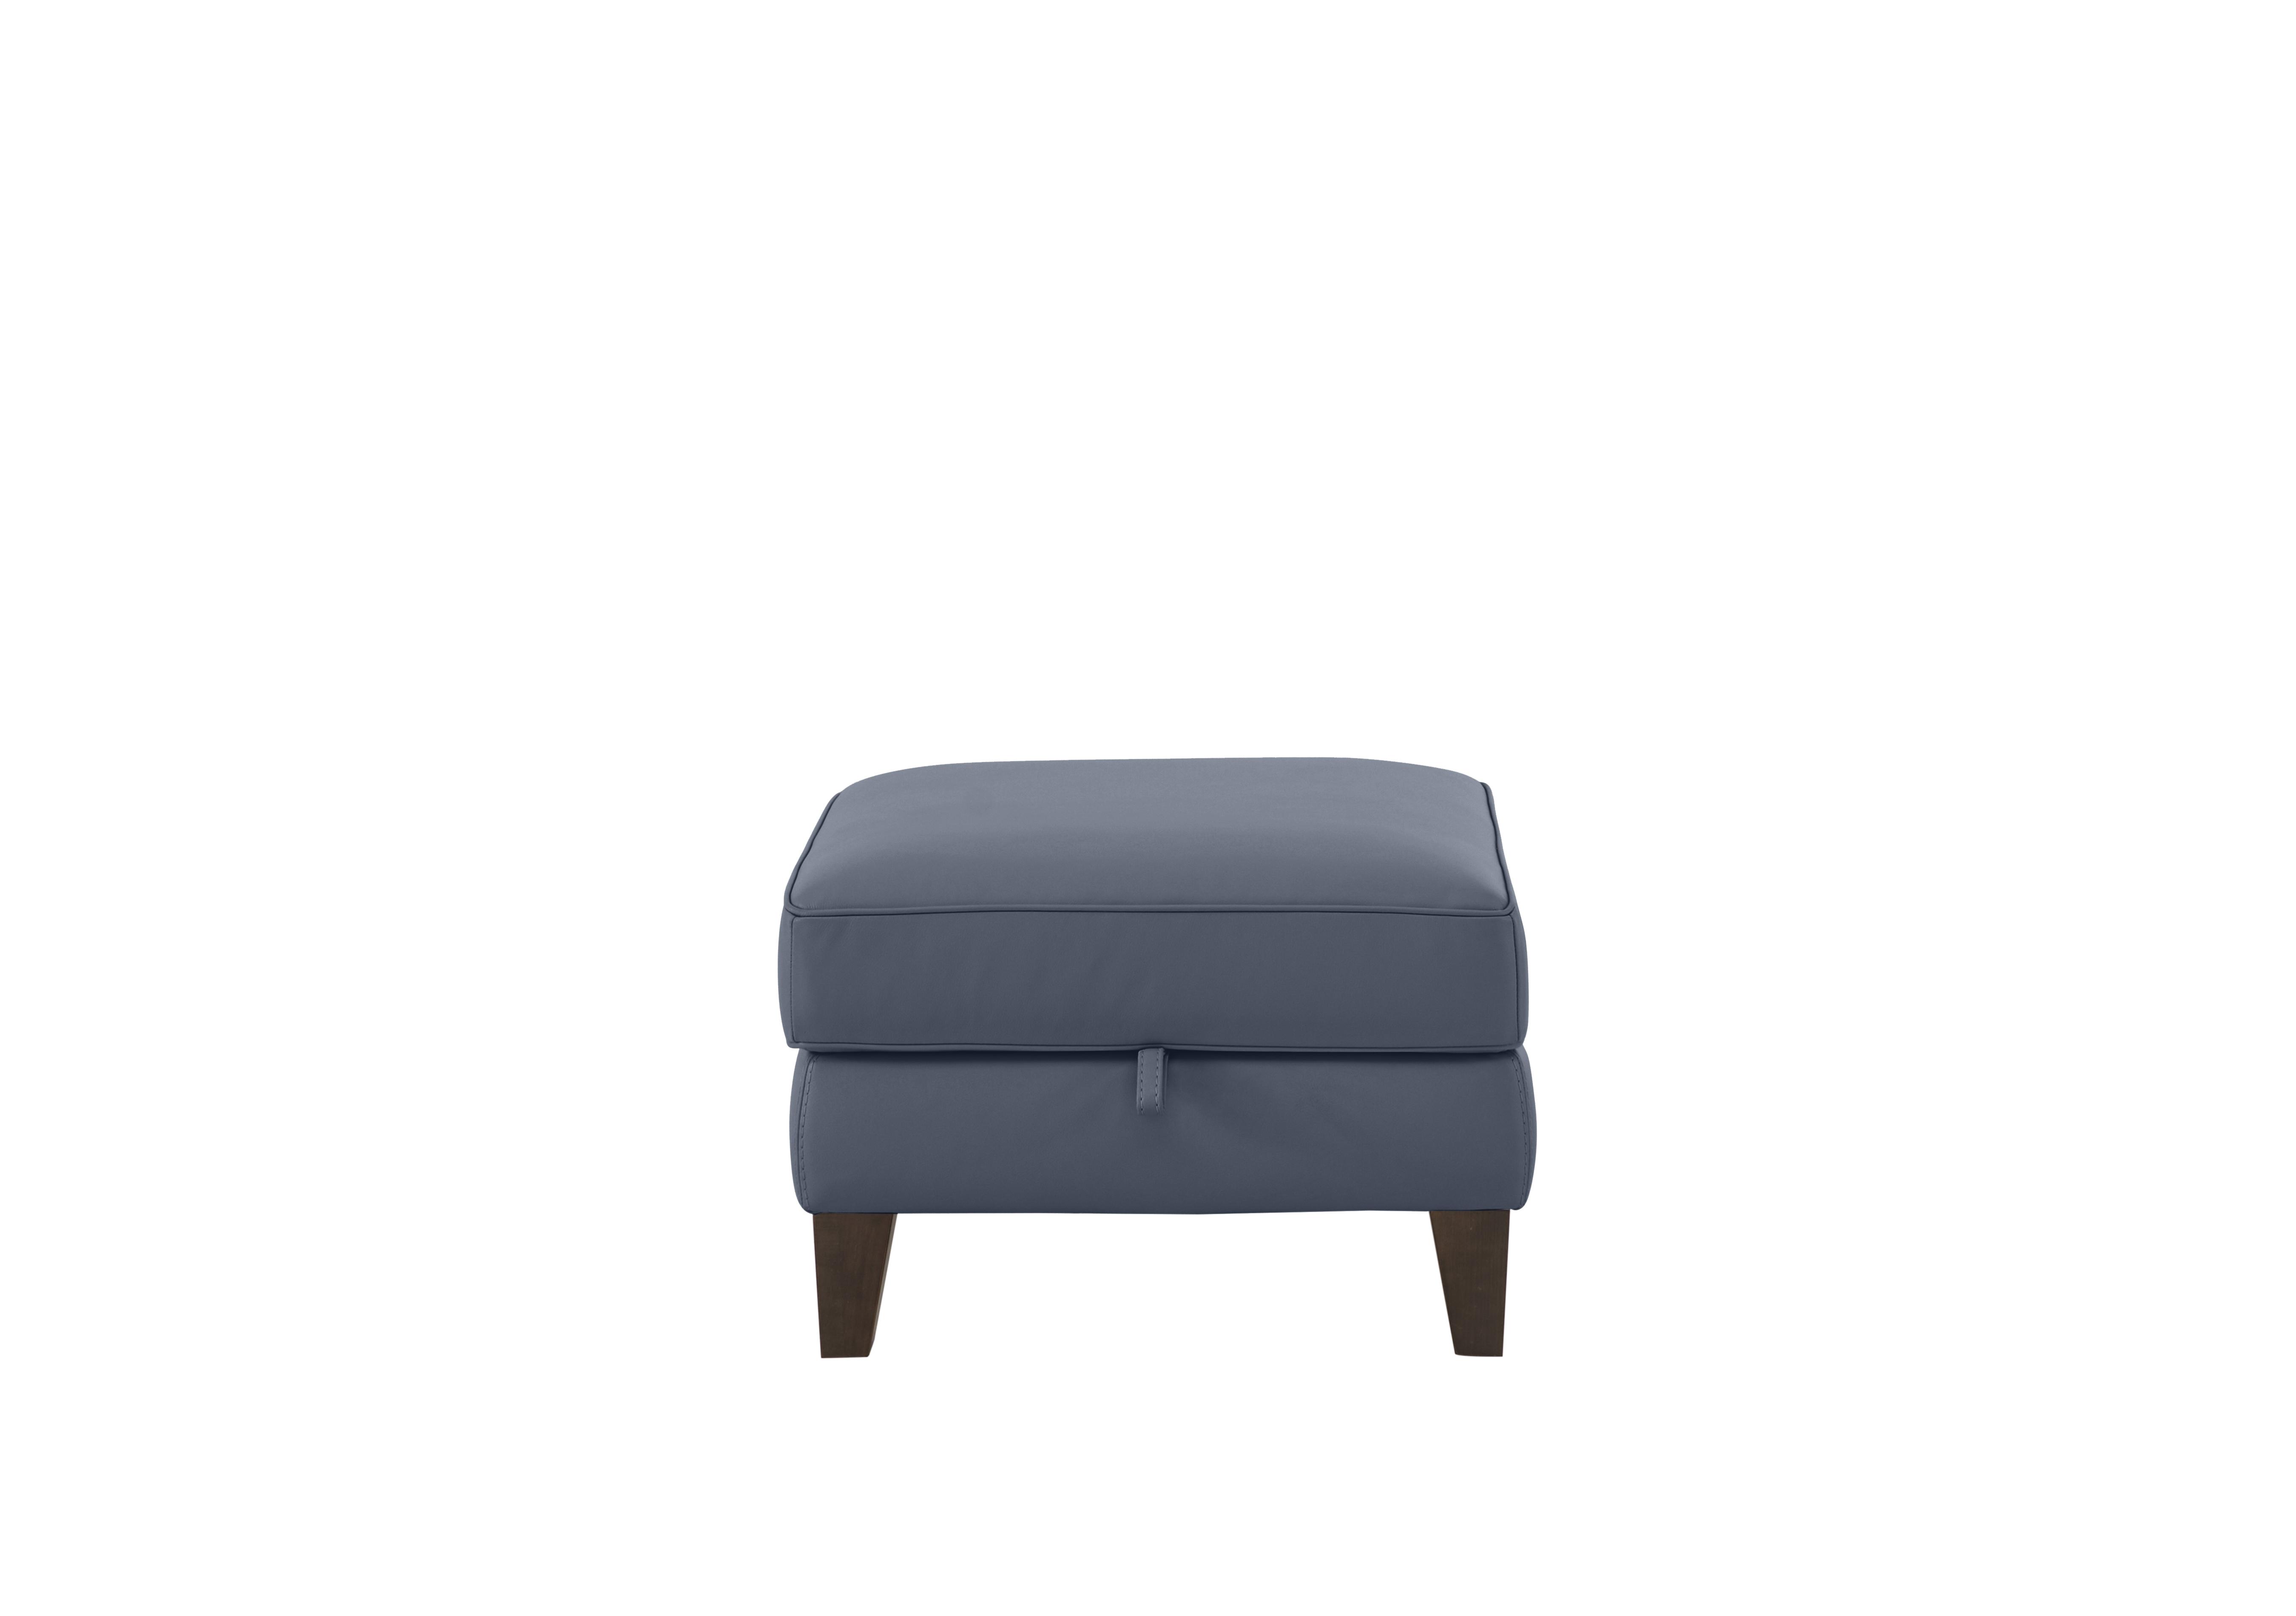 Brondby Leather Storage Footstool in Bv-313e Ocean Blue on Furniture Village